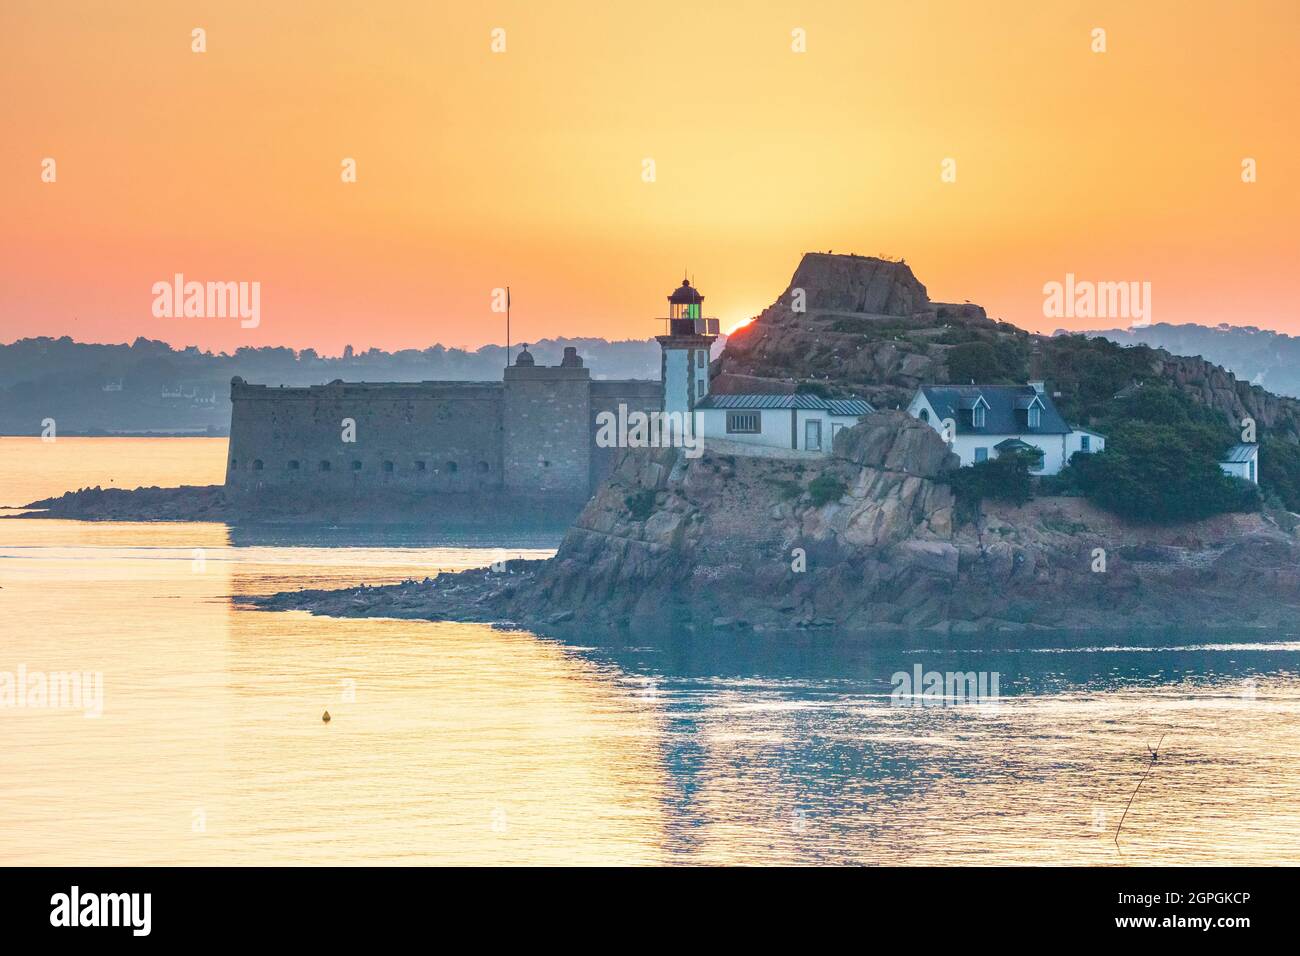 France, Finistere, Morlaix bay, Carantec, Louet island and Taureau castle built by Vauban in the 17th century Stock Photo